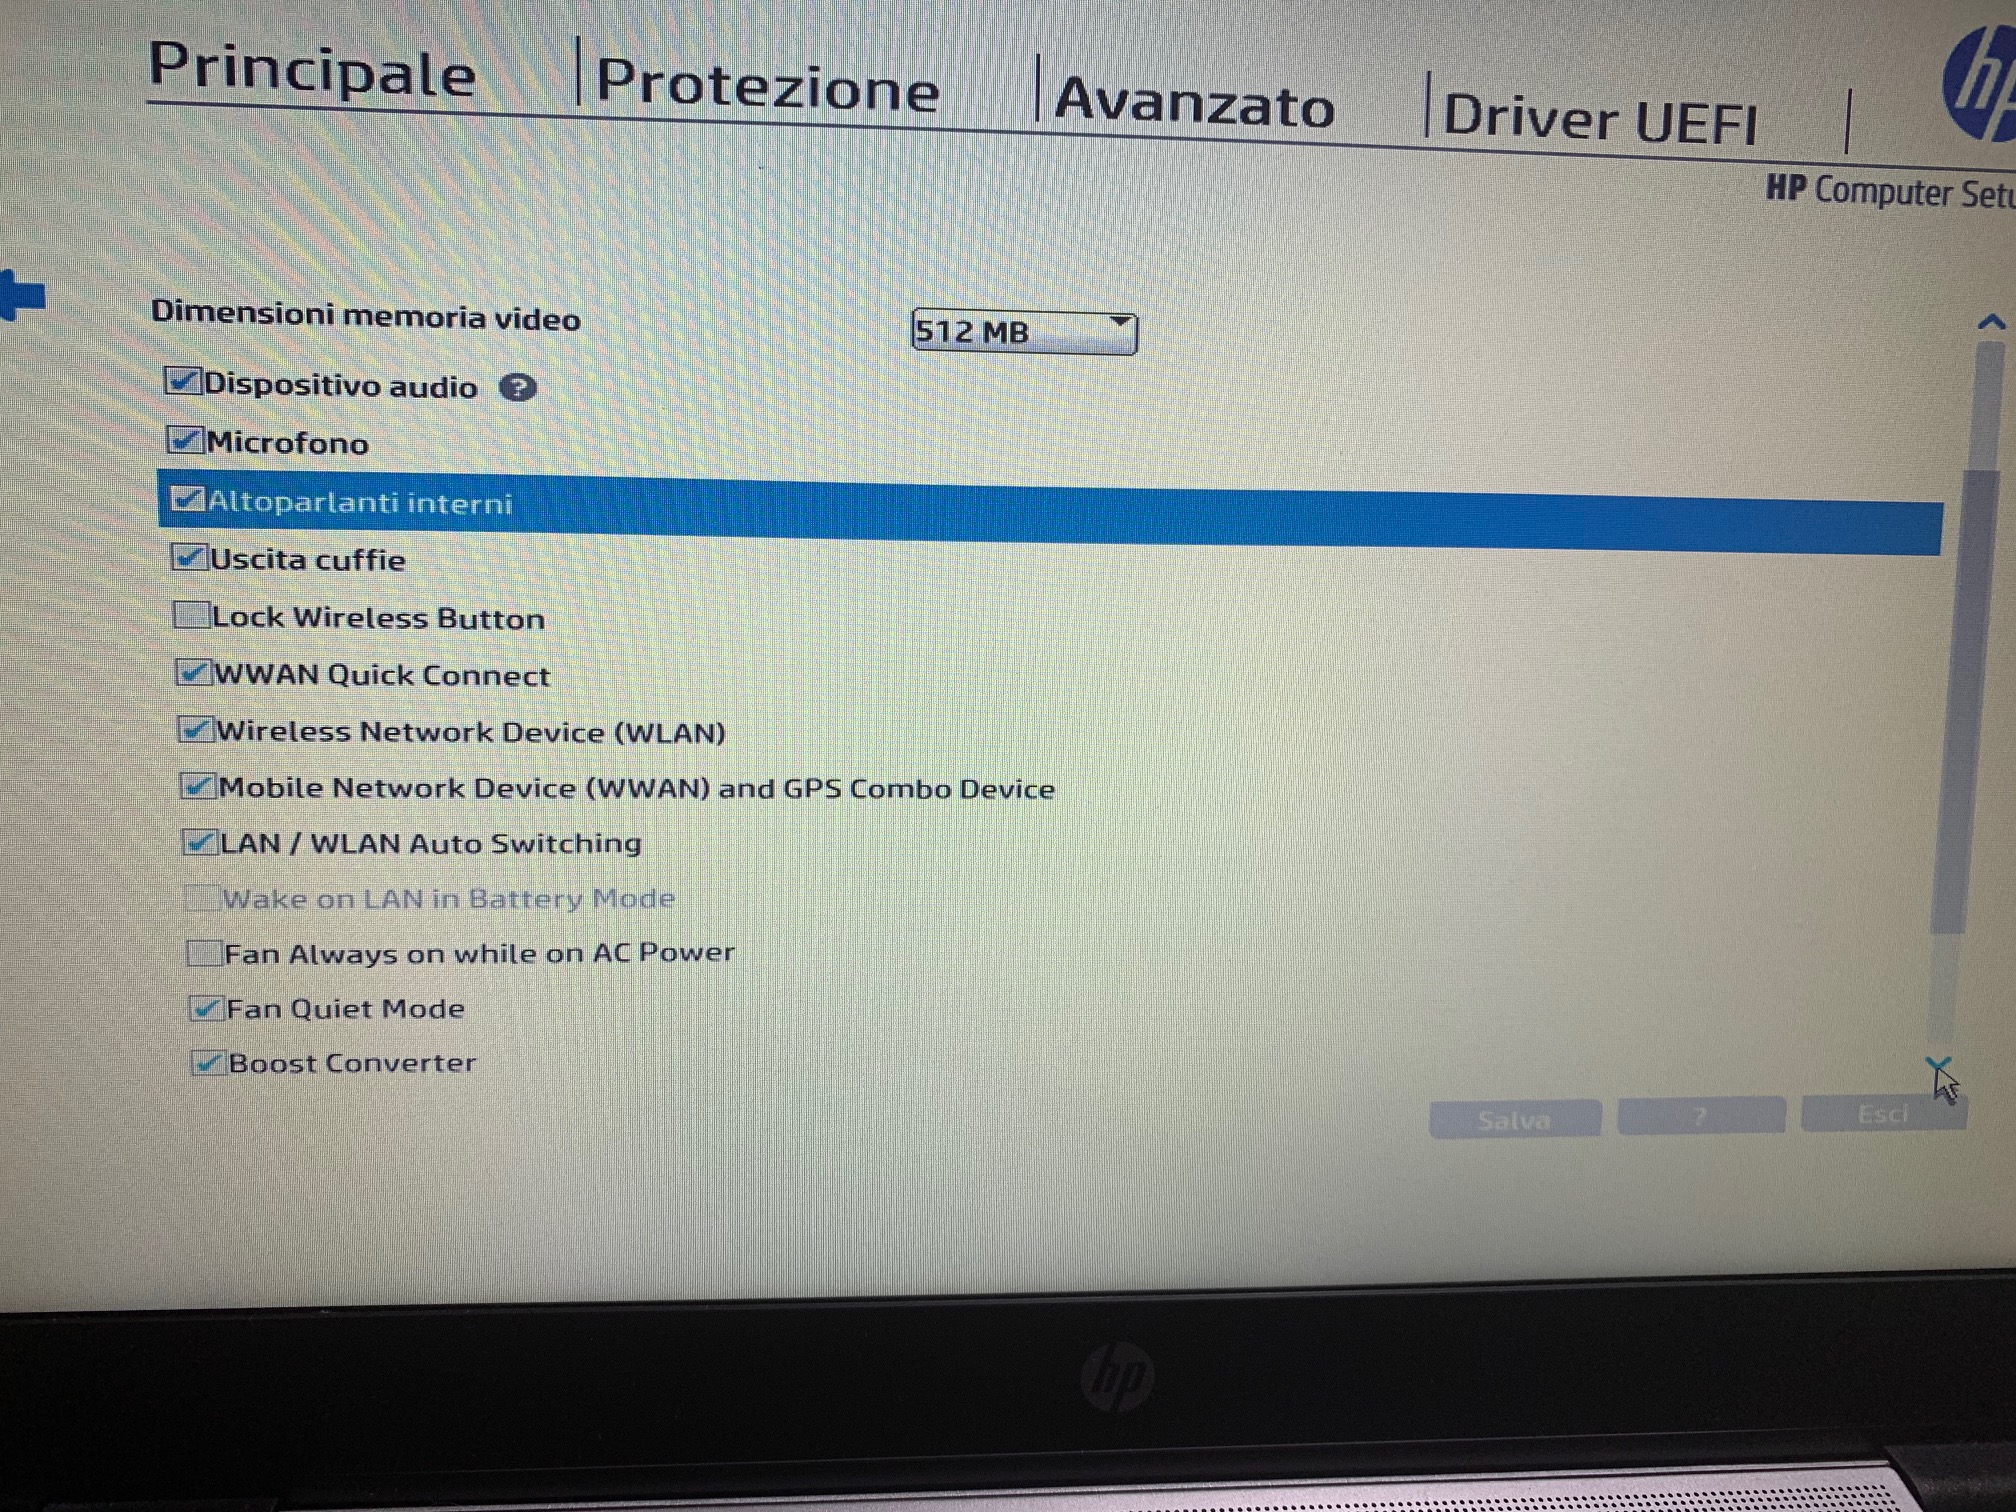 HP Elitebook 840 G3 Bluetooth not detected - HP Support Community - 7526054